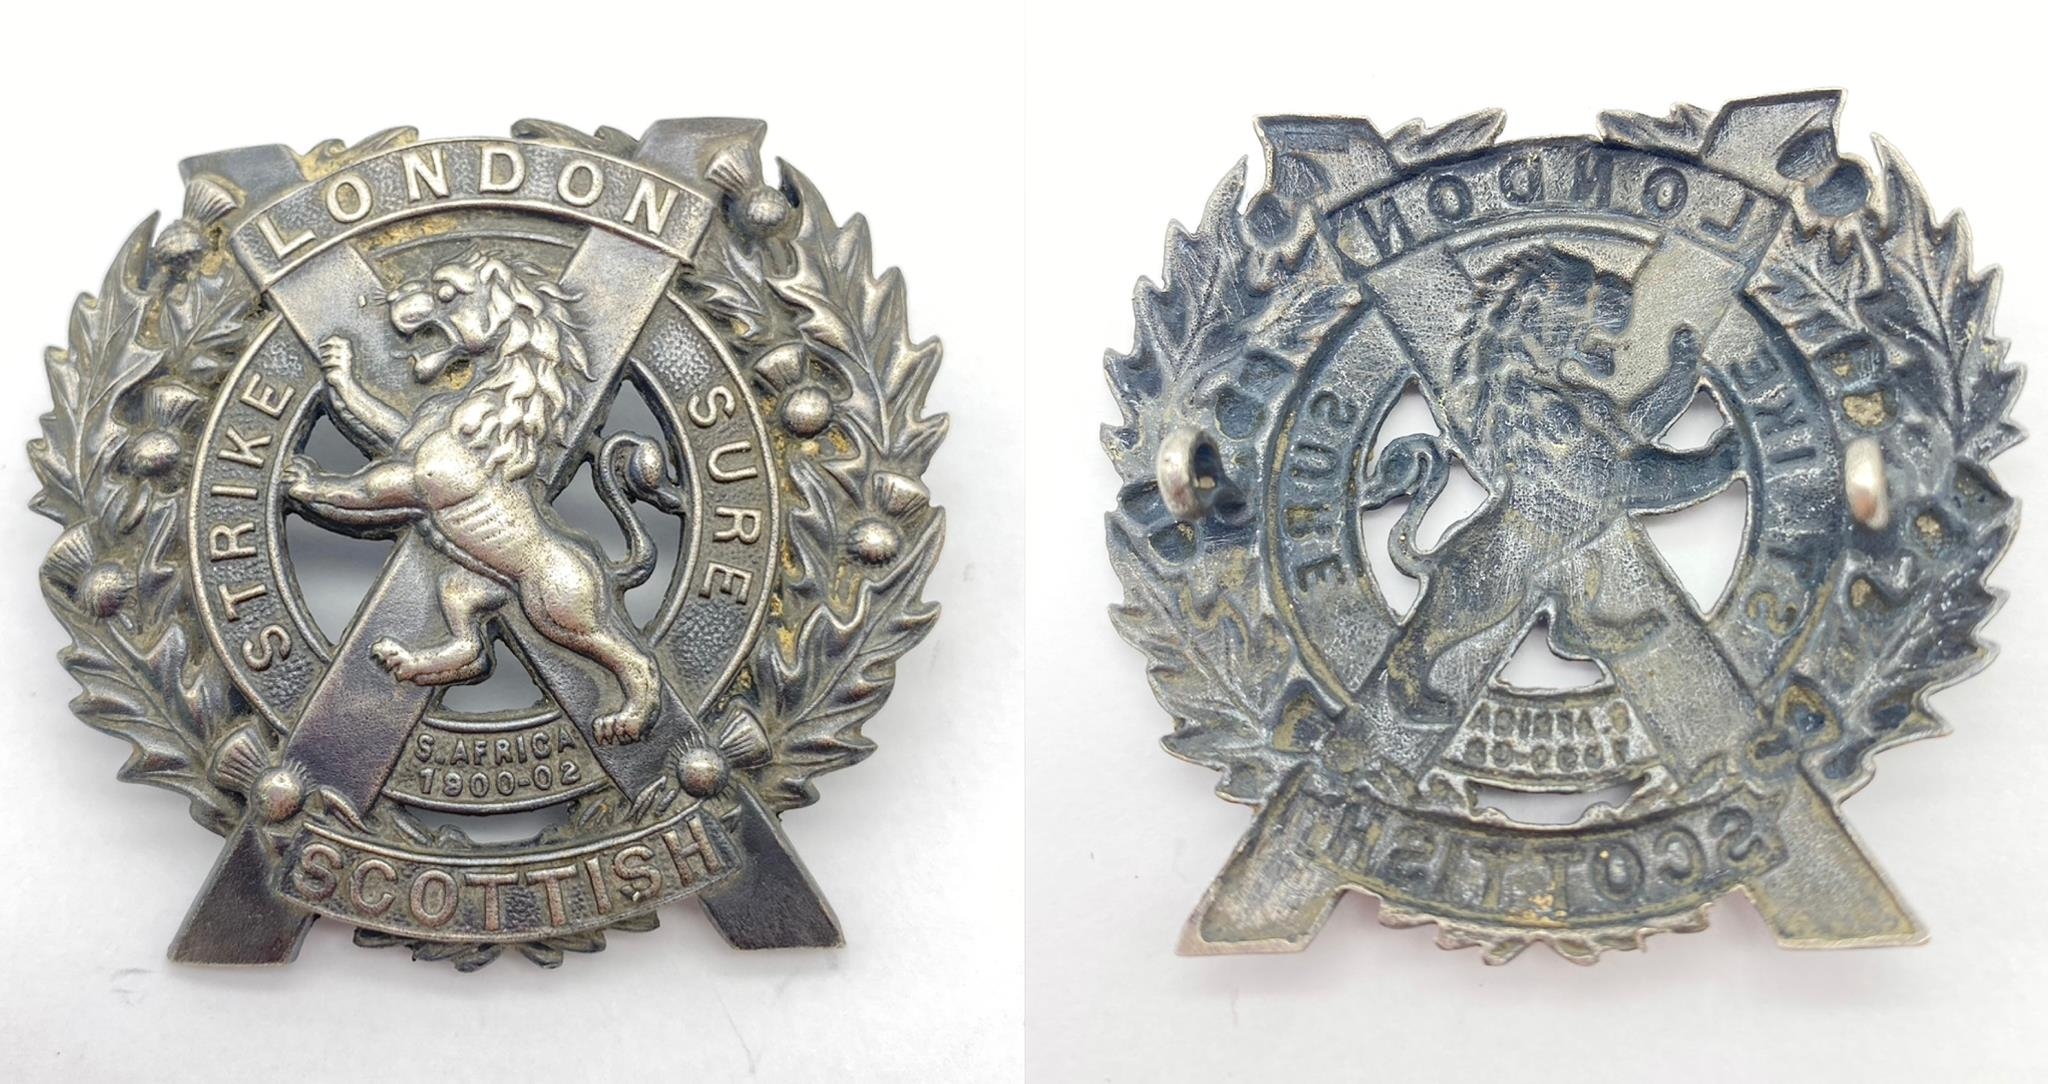 WW1 British London Scottish Regiment Silver Cap Badge. The badge depicting a Lion in a St. Andrews